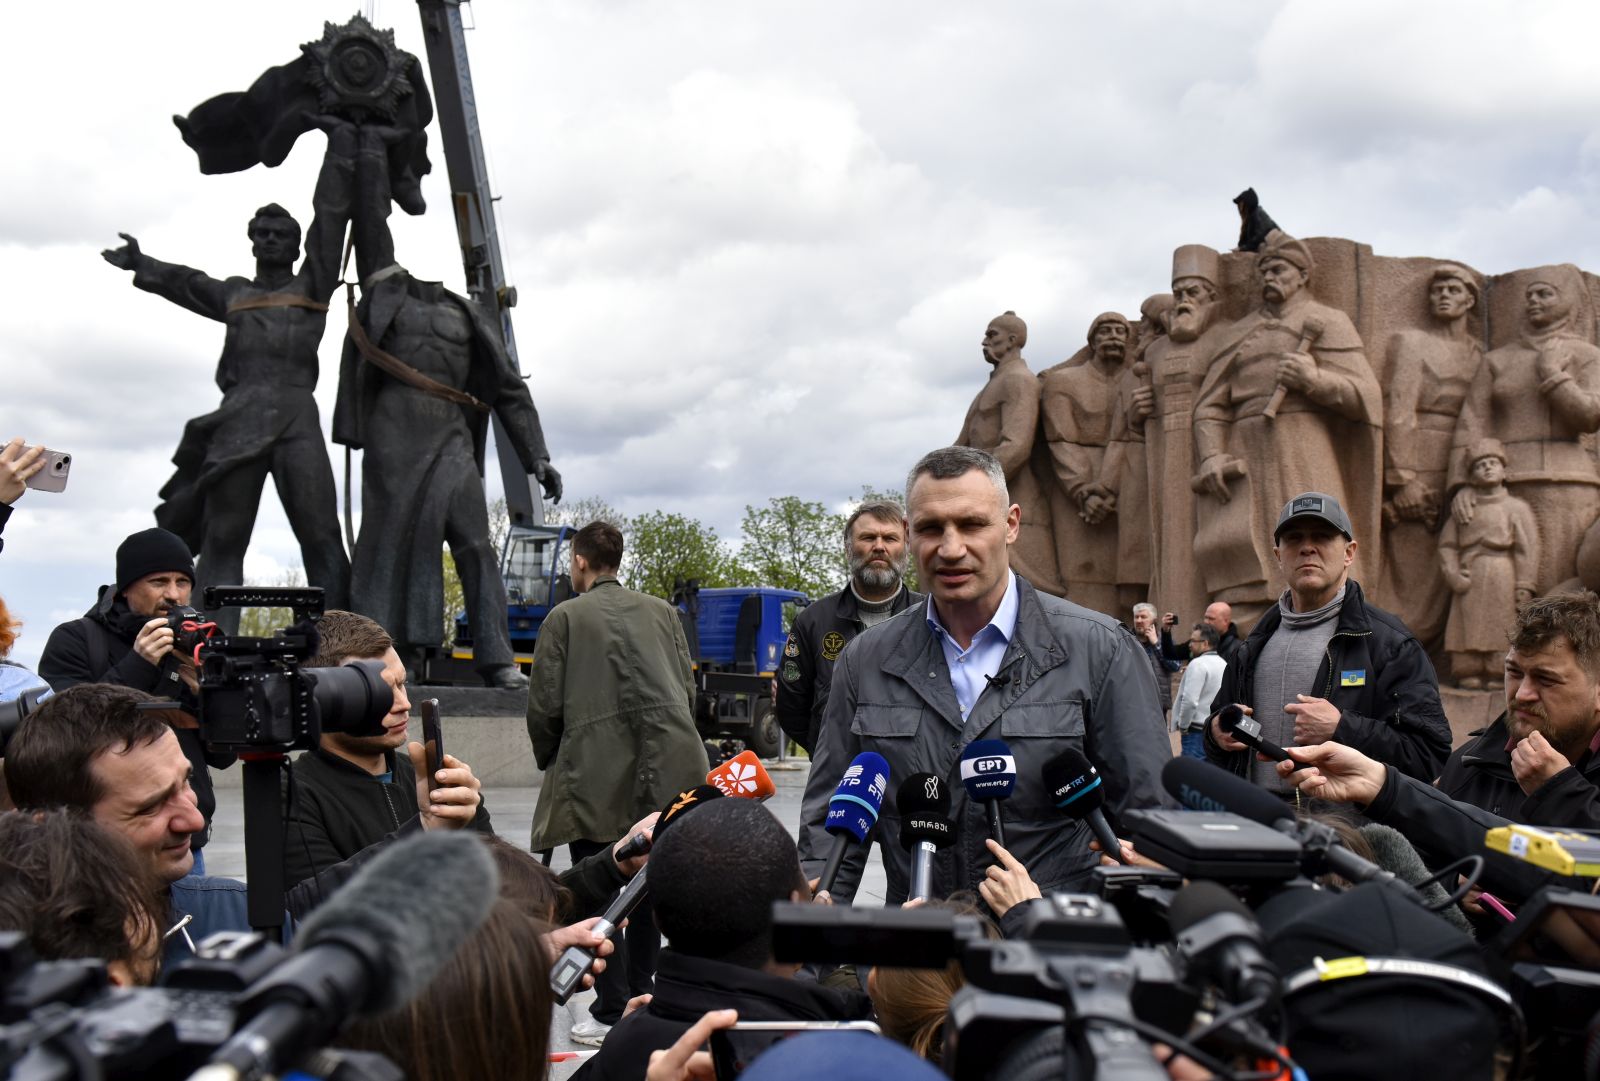 epa09910474 Kyiv's mayor Vitali Klitschko speaks with the press near the Monument of Friendship in Kyiv (Kiev) Ukraine, 26 April 2022. The Monument of Friendship between the Russian and Ukrainian nations was opened in 1982, on the 60th anniversary of founding of USSR. On April 25, Kyiv's mayor Vitali Klitschko announced the dismantling of the monument. On 24 February Russian troops had entered Ukrainian territory resulting in fighting and destruction in the country, a huge flow of refugees, and multiple sanctions against Russia.  EPA/OLEG PETRASYUK